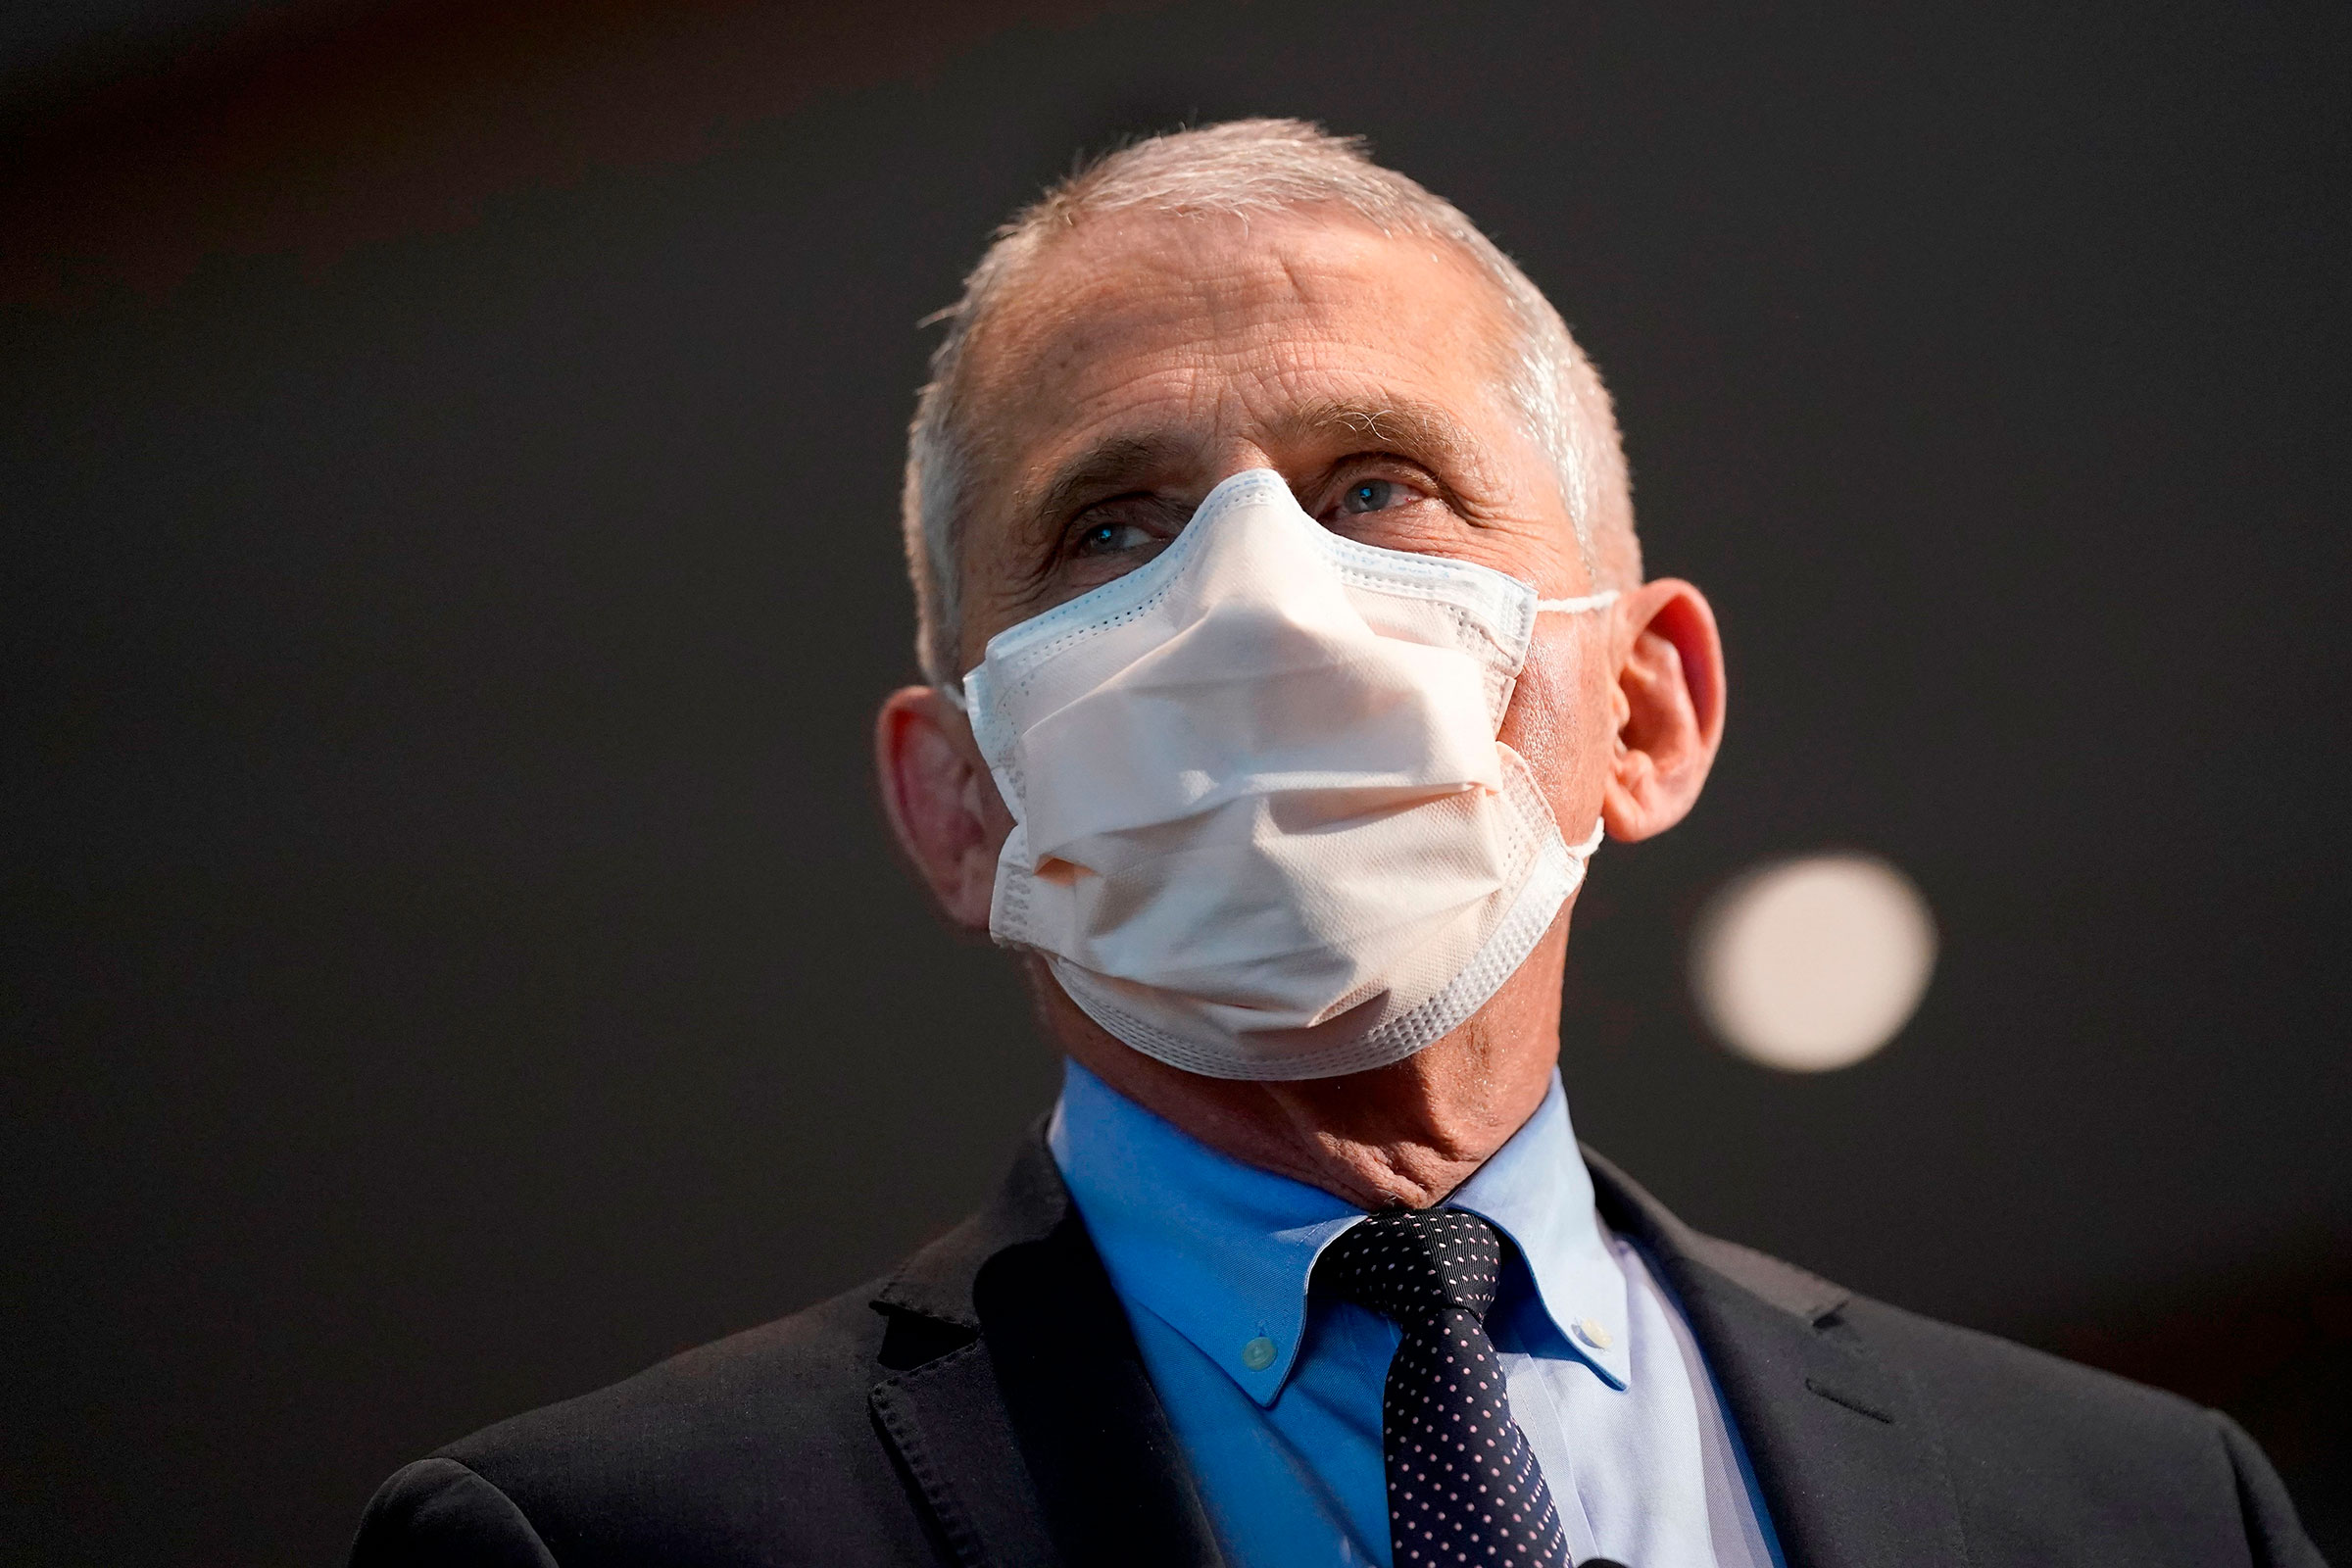 Dr. Anthony Fauci speaks before receiving his first dose of the Covid-19 vaccine at the National Institutes of Health on December 22, 2020 in Bethesda, Maryland. 